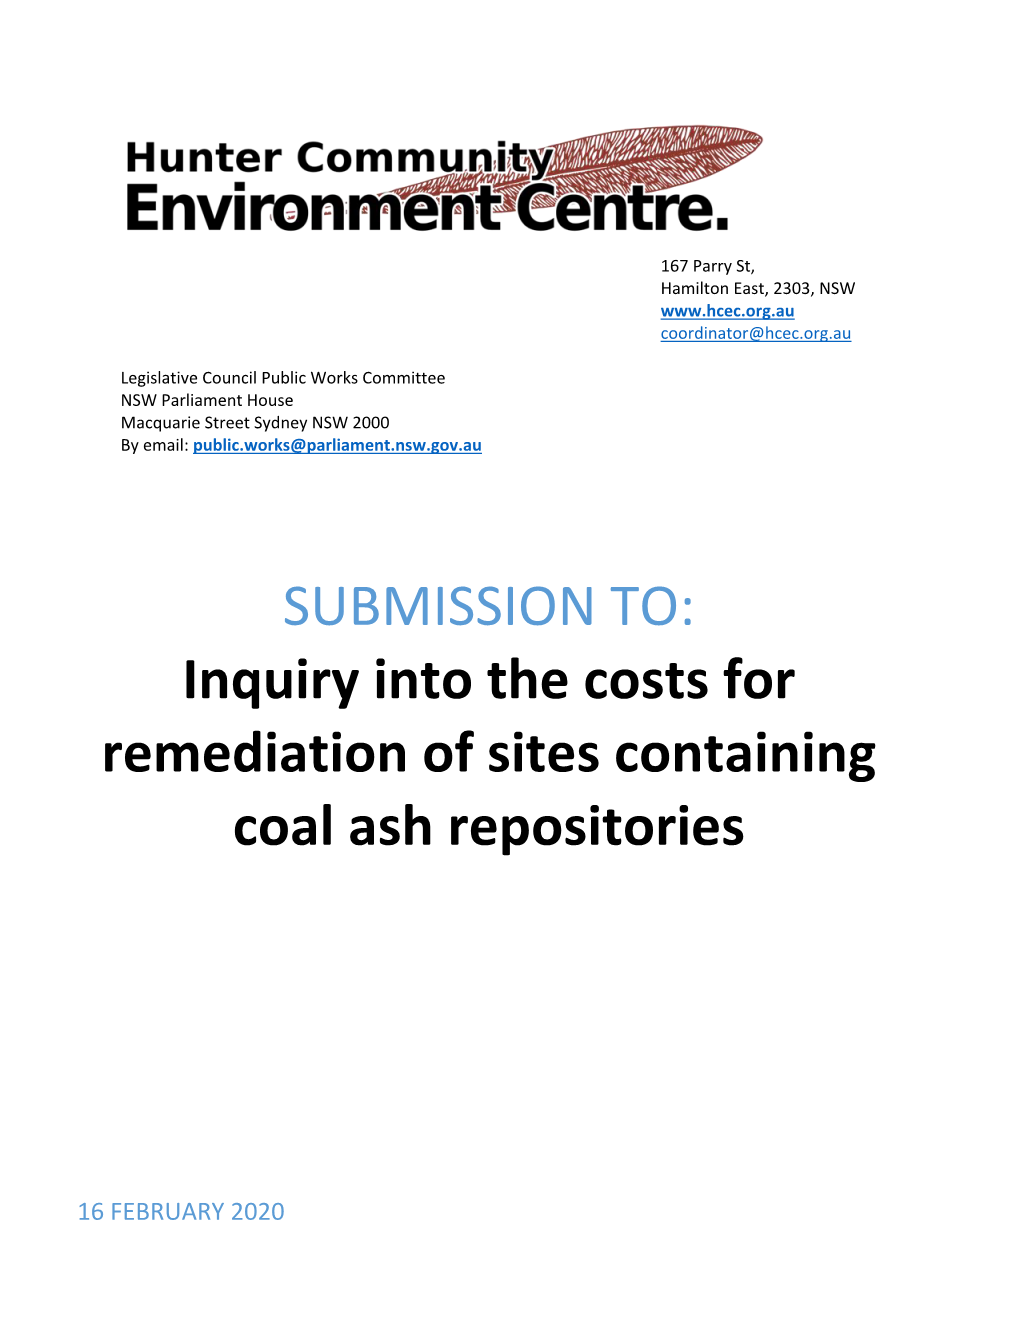 SUBMISSION TO: Inquiry Into the Costs for Remediation of Sites Containing Coal Ash Repositories